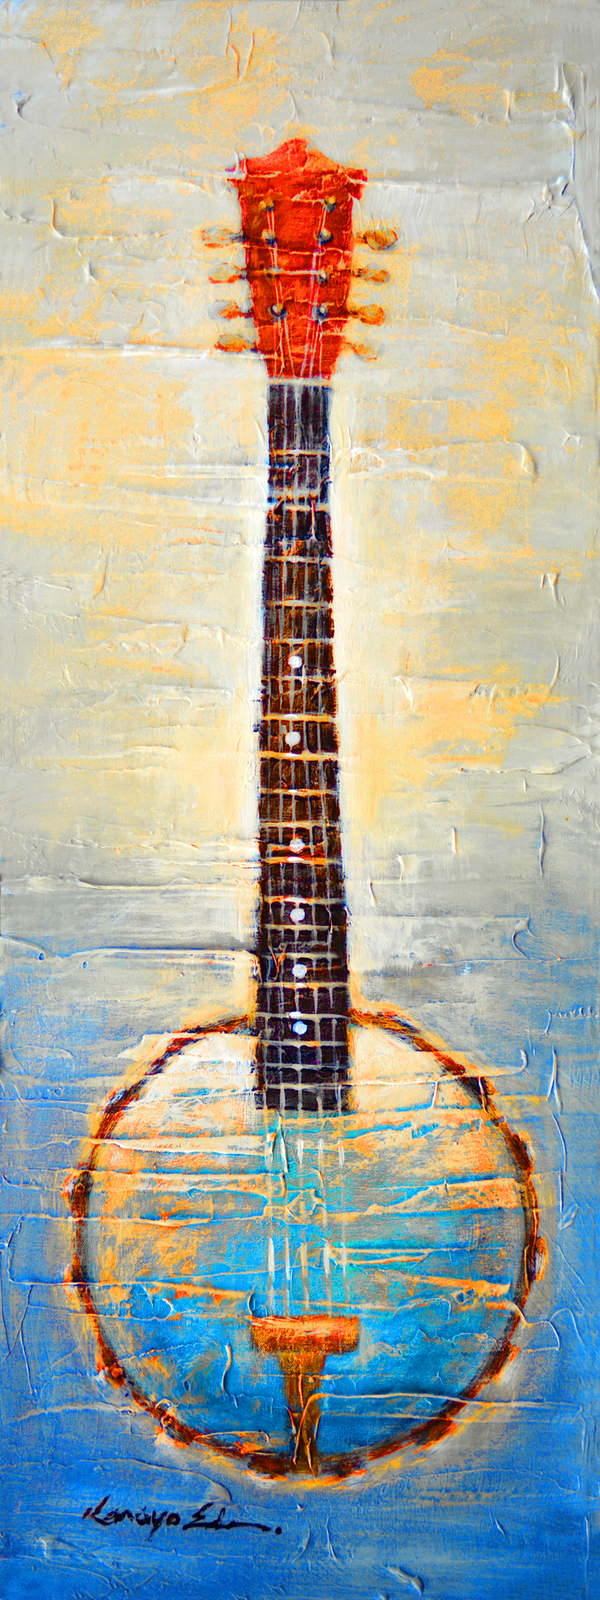 Primary image for 'Blue Banjo' by Kanayo Ede. Giclee print on canvas. 15" x 40"